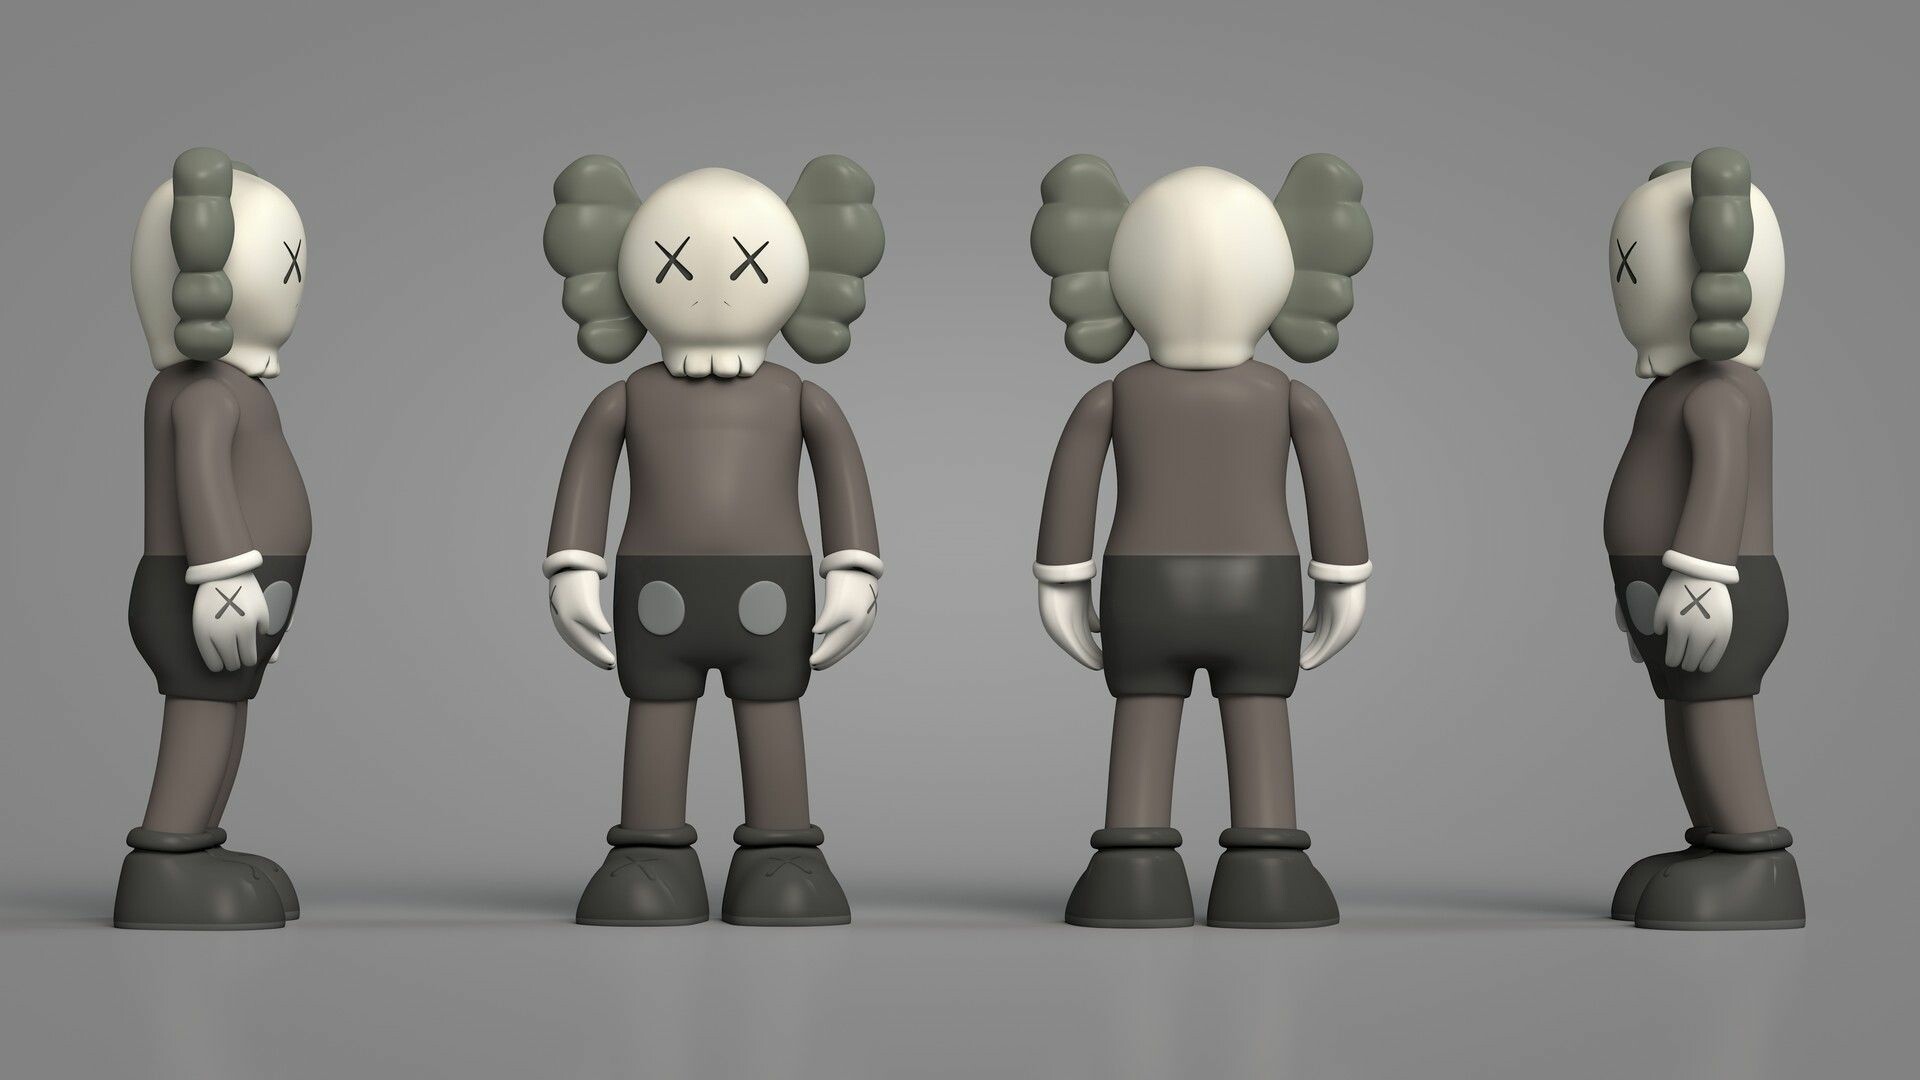 KAWS: Work includes repeated use of a cast of figurative characters and motifs. 1920x1080 Full HD Wallpaper.